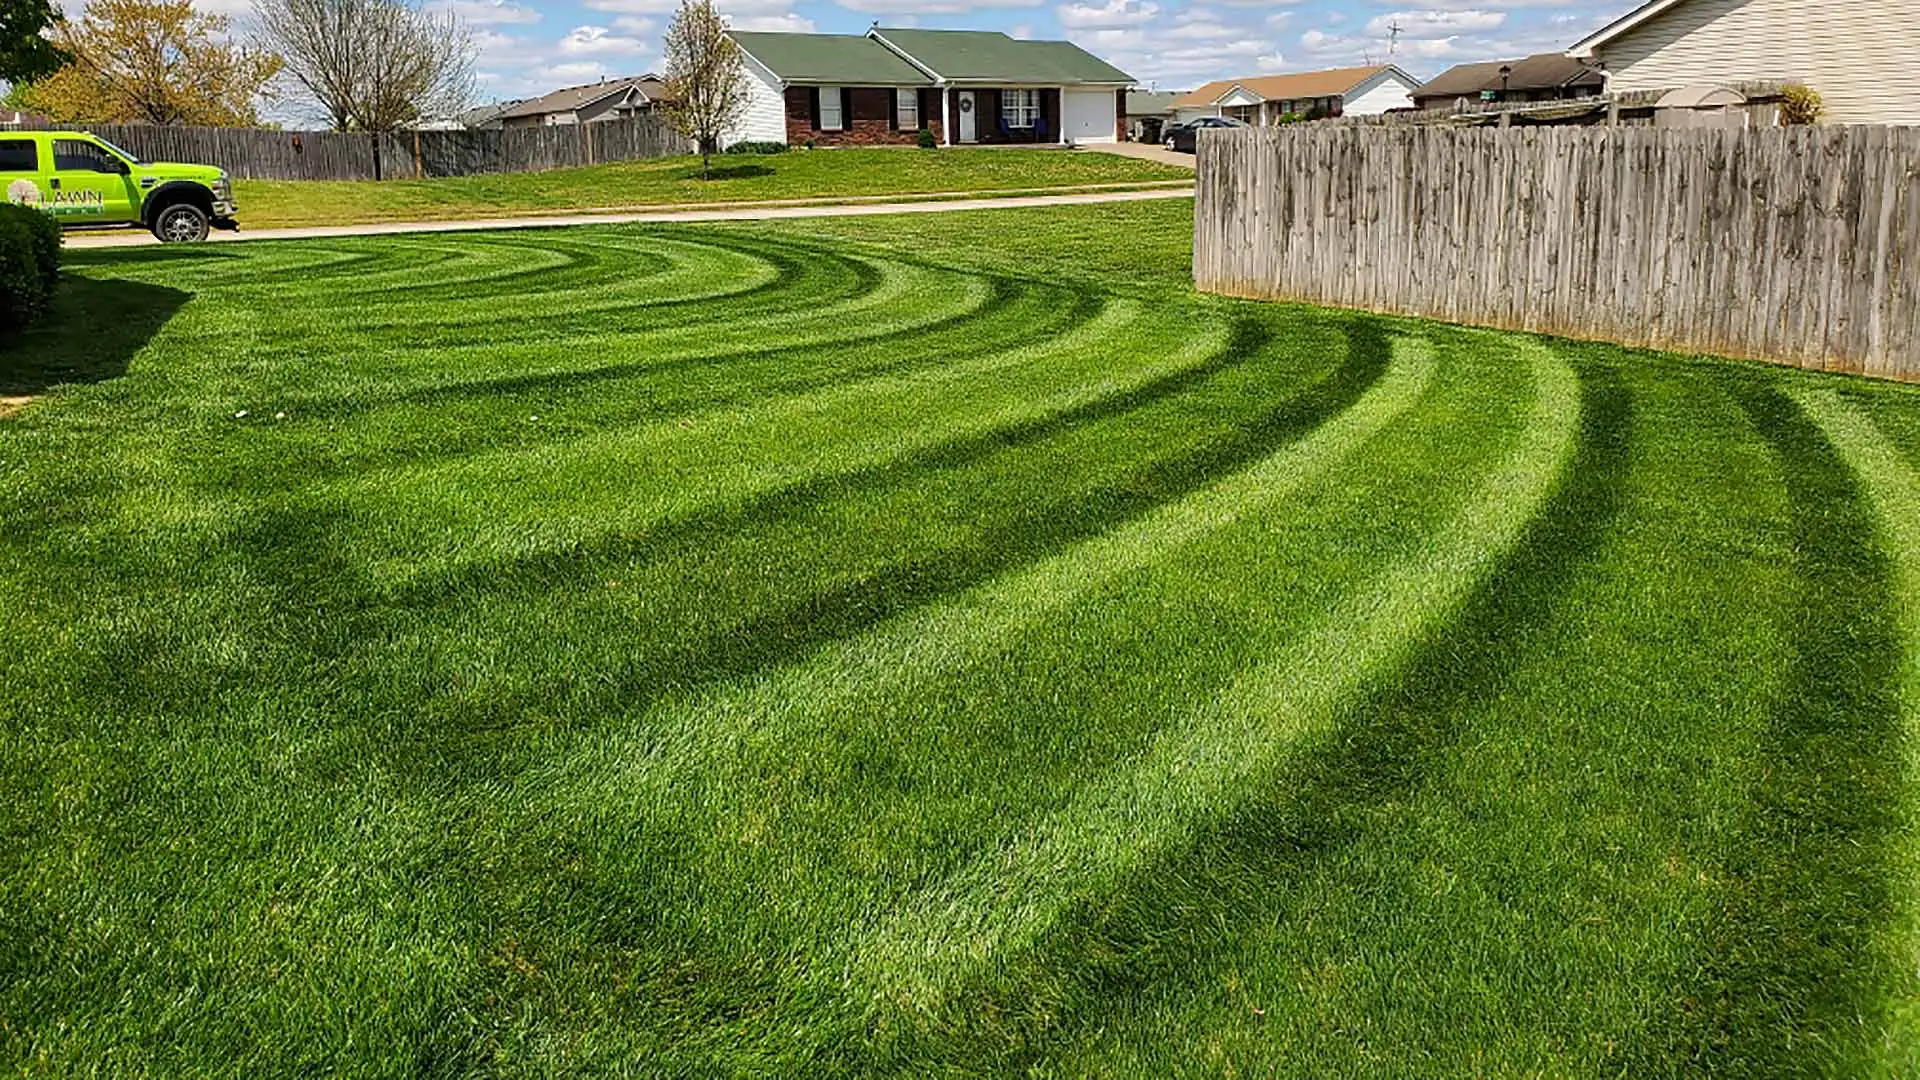 Home in Jeffersonville, Indiana with freshly mowed lawn.